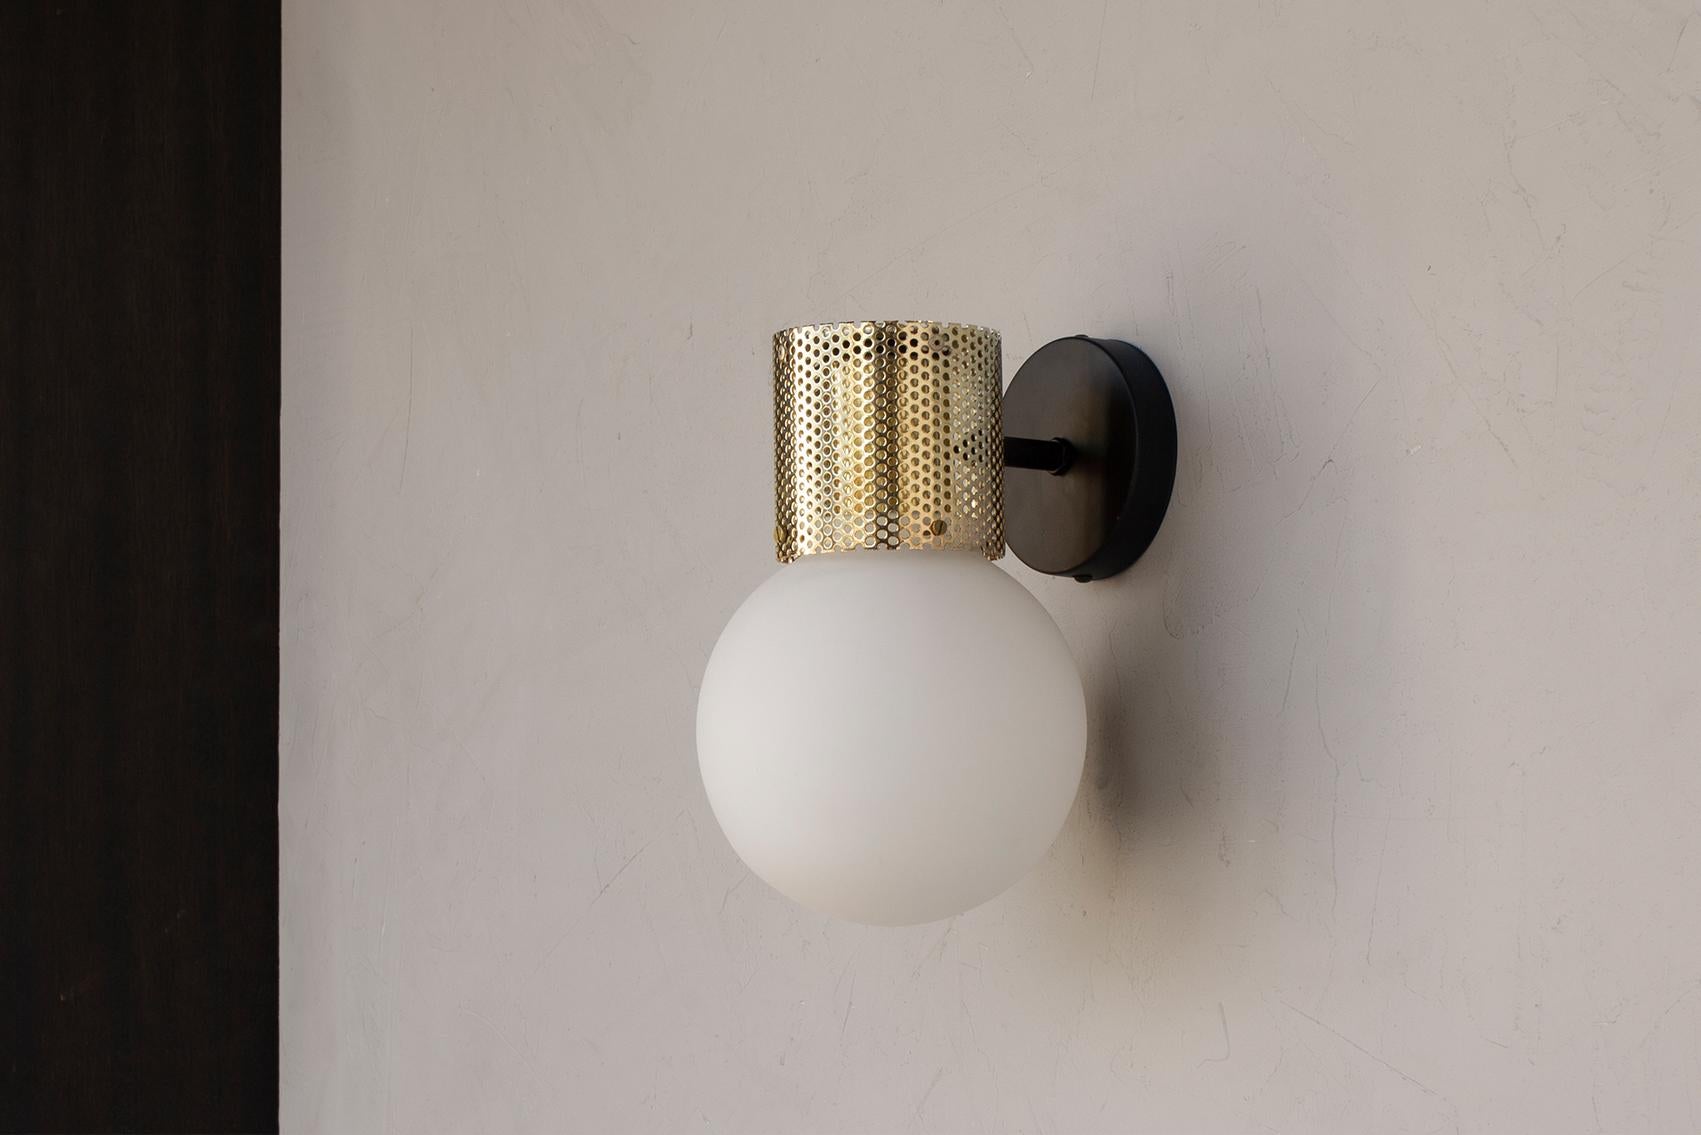 Combining hand blown opal glass with a perforated metal housing, Perf Sconce is an elemental and versatile decorative fixture.
Utilizing a low energy LED bulb, Perf Pendant is available in 3 finishes, with custom colors available on request.
This